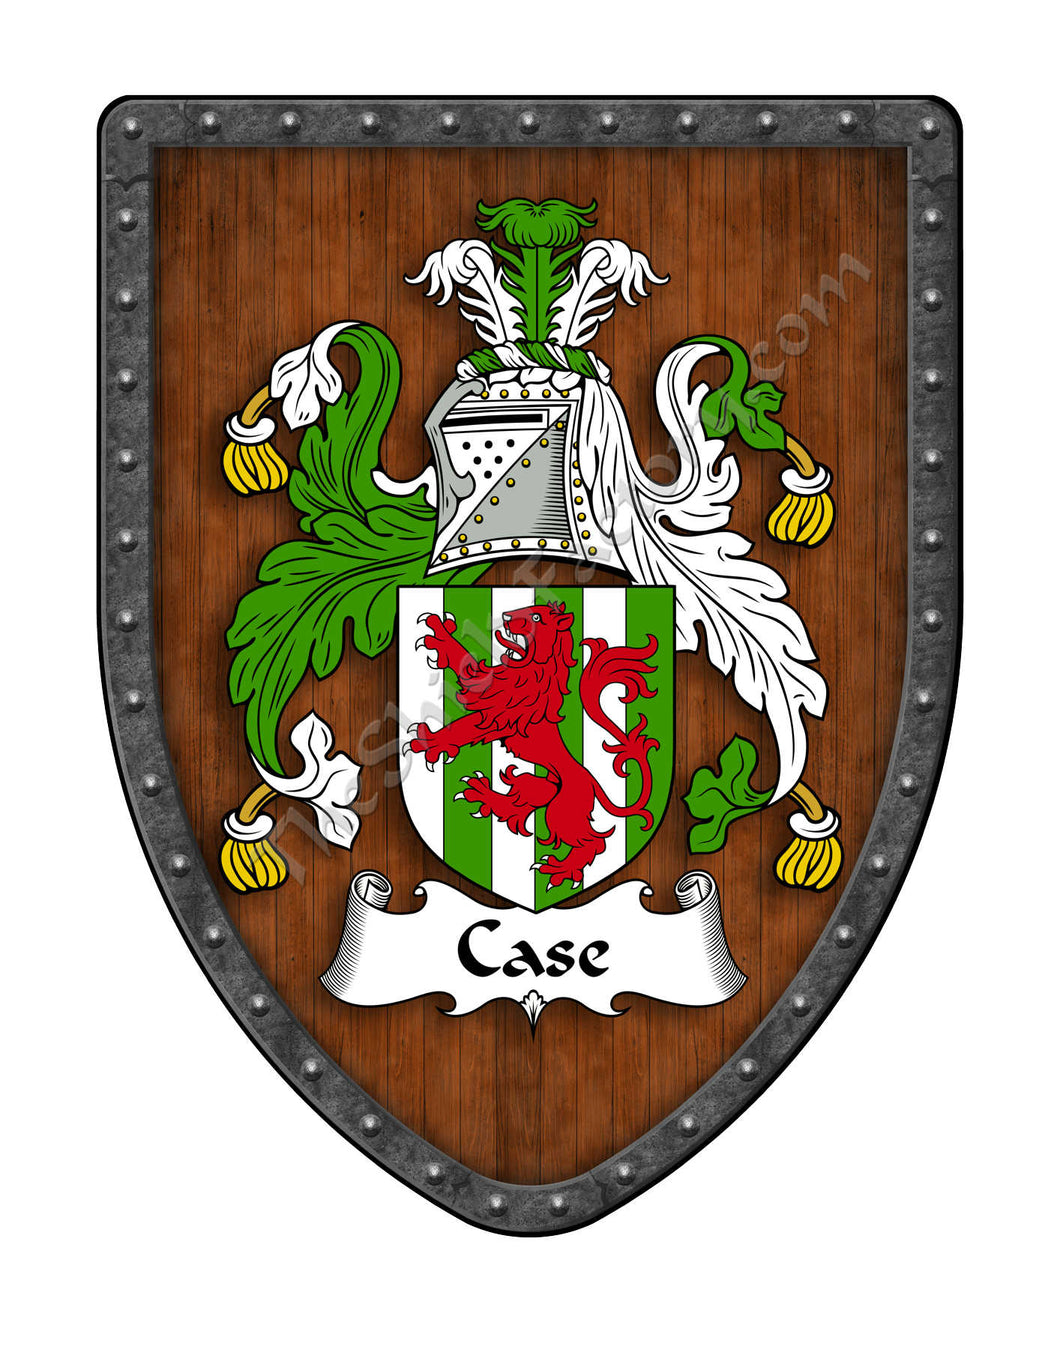 Case Coat of Arms Family Crest Shield